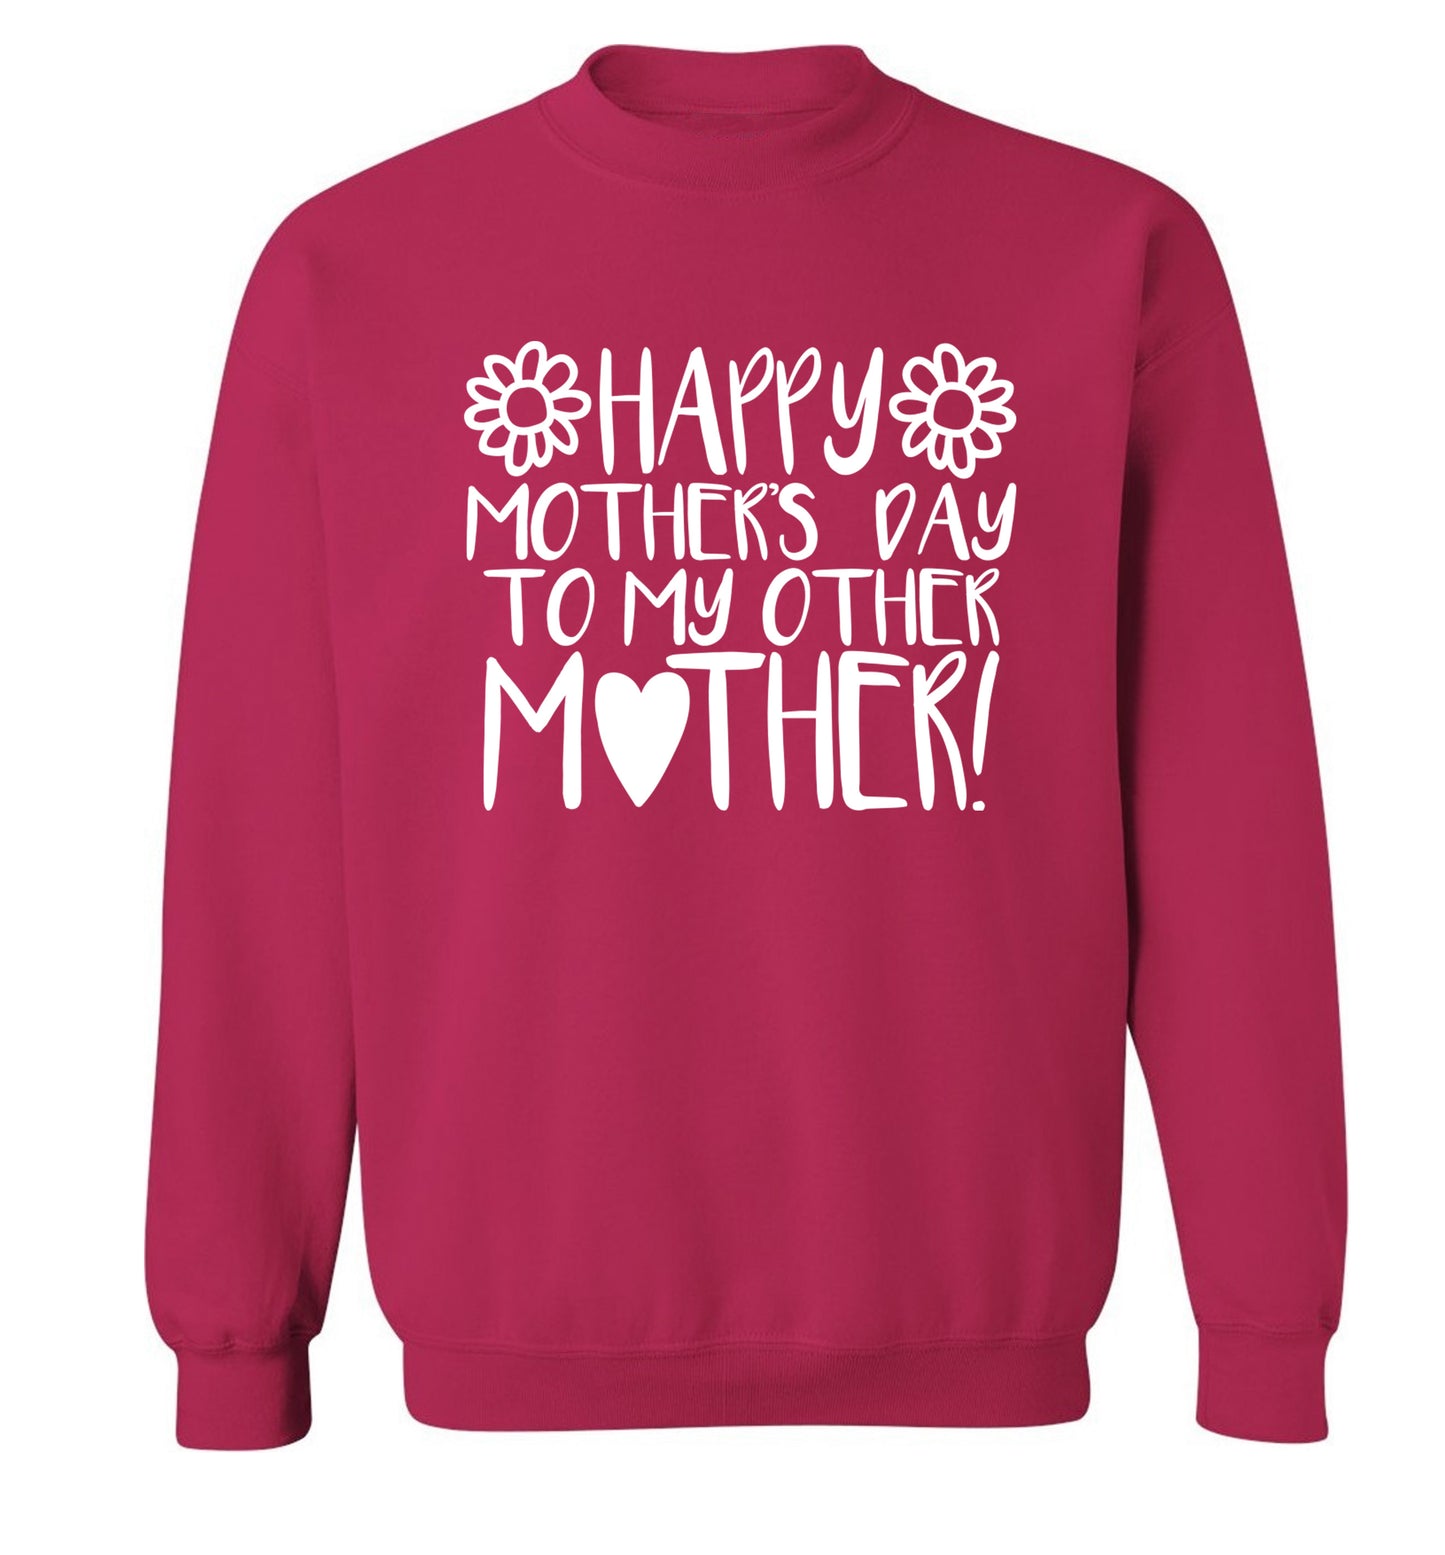 Happy mother's day to my other mother Adult's unisex pink Sweater 2XL